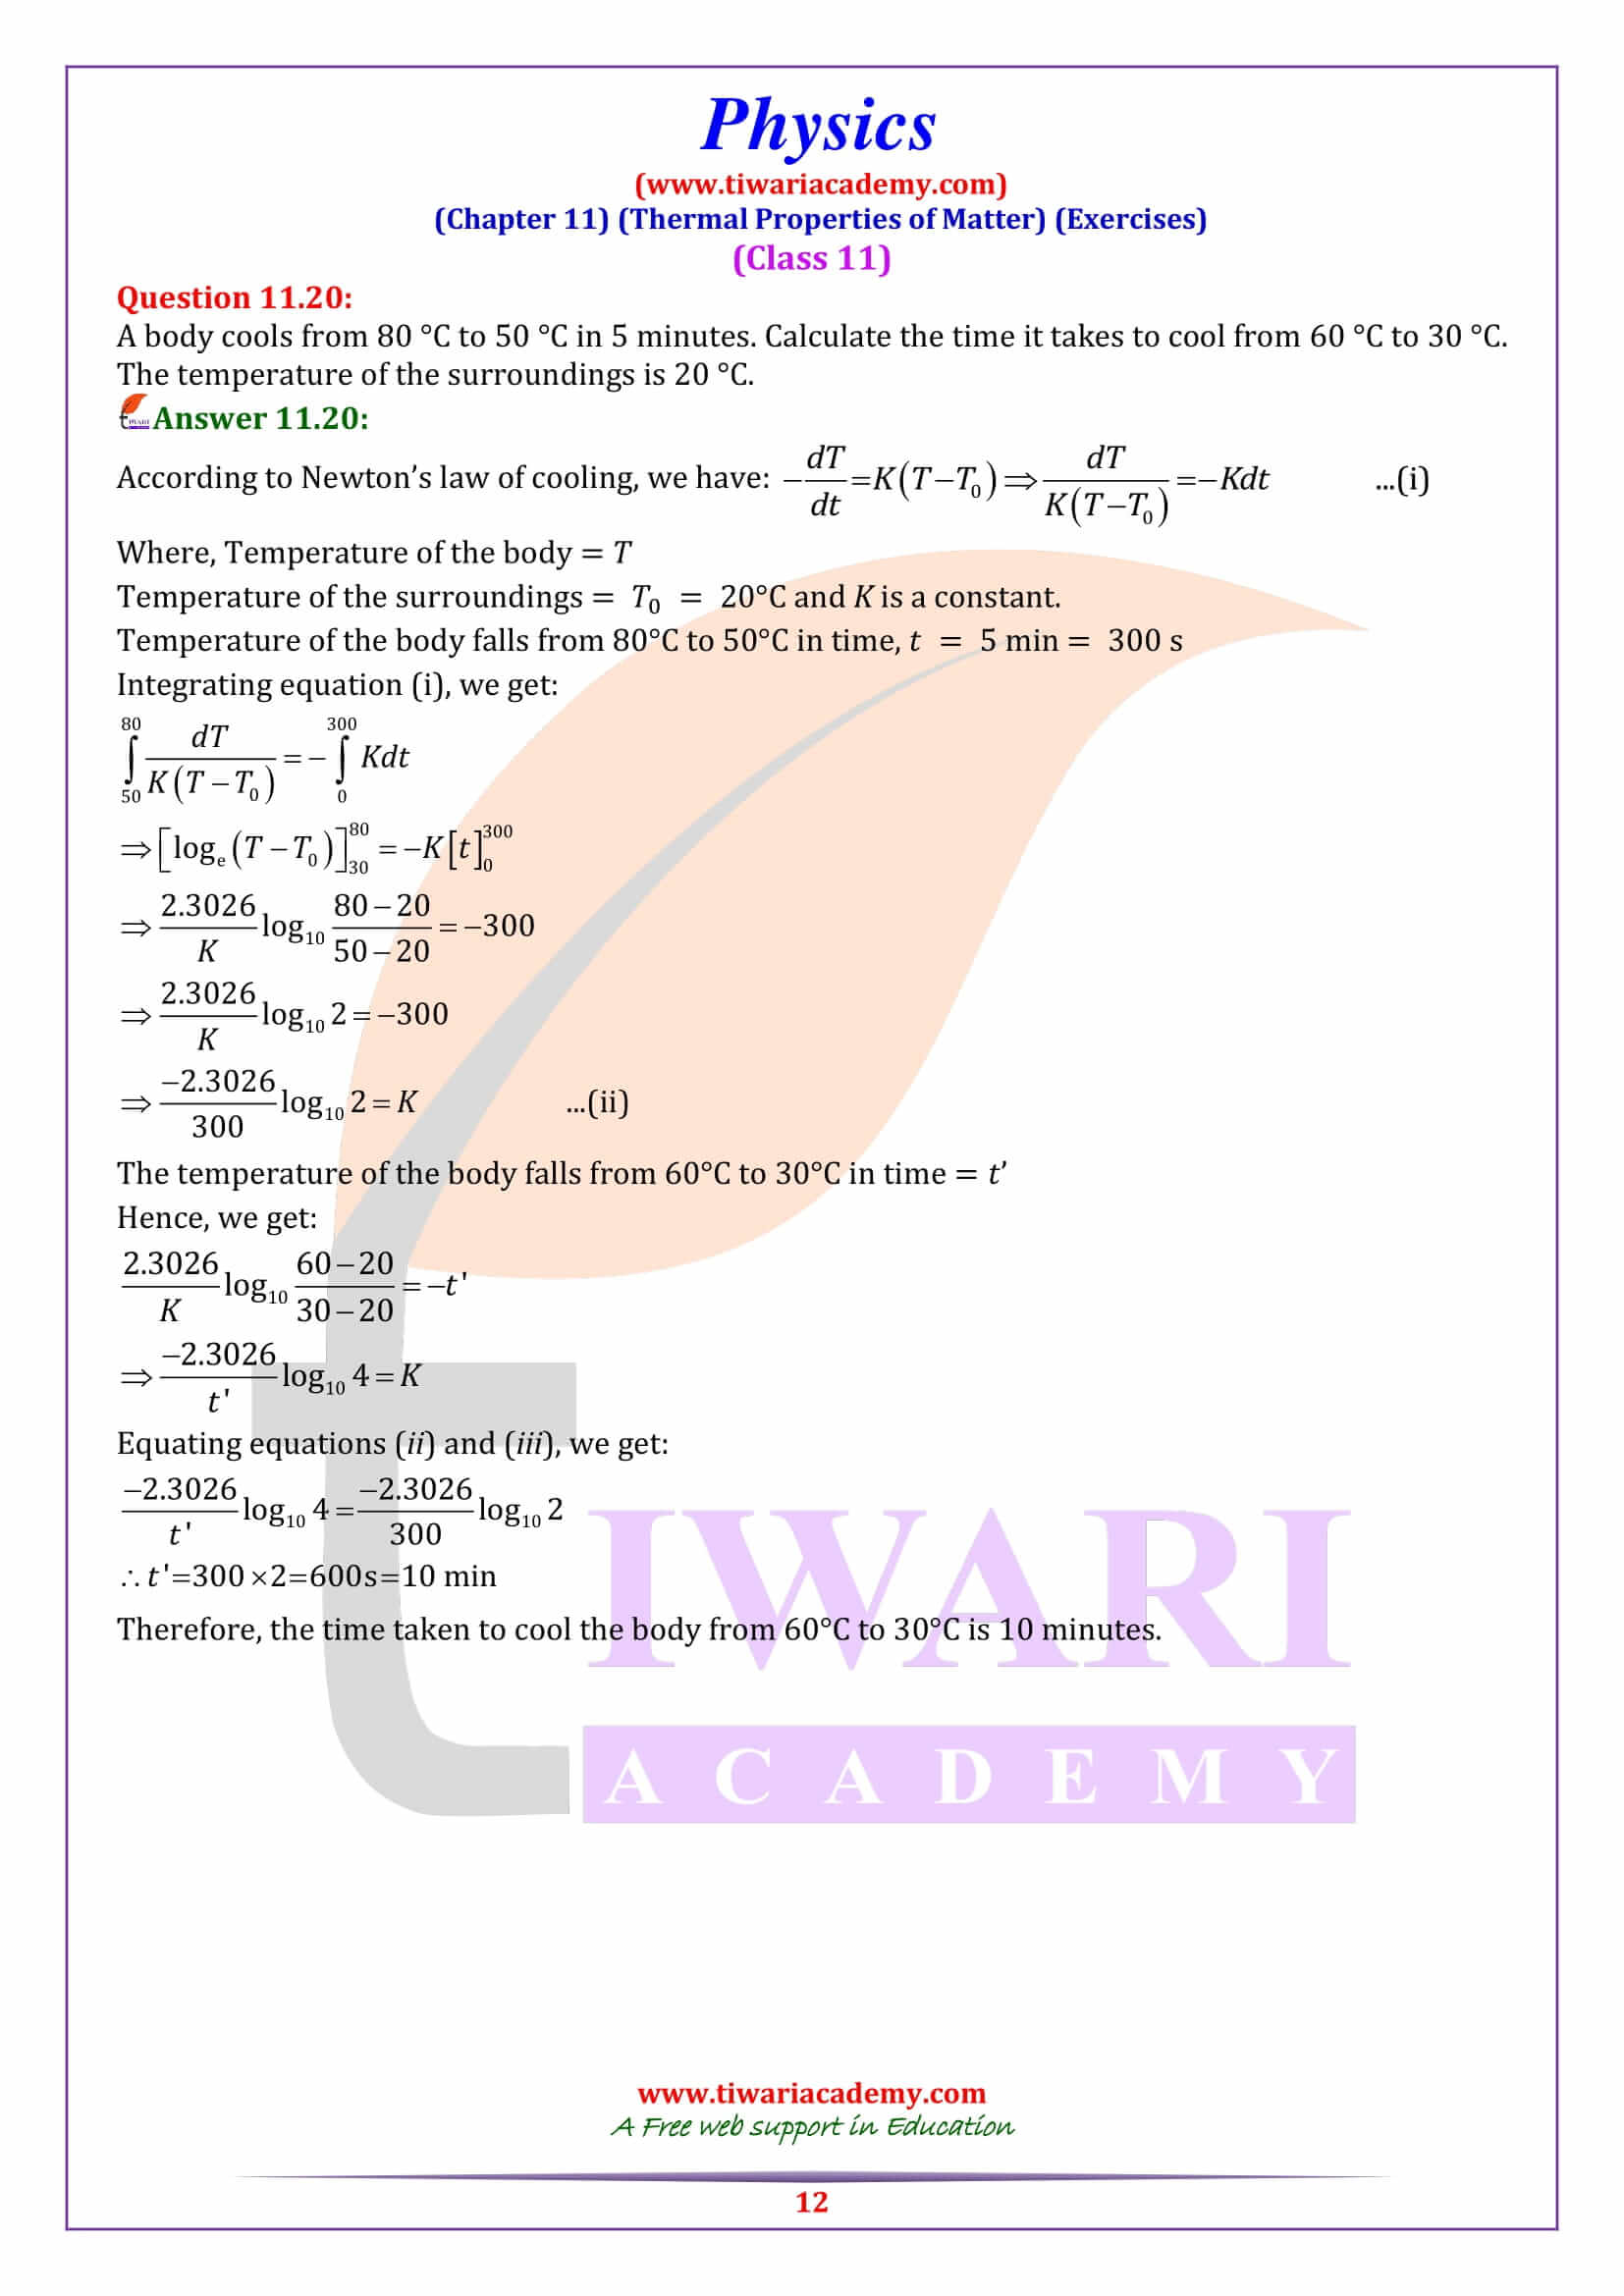 Class 11 Physics Chapter 11 guide free